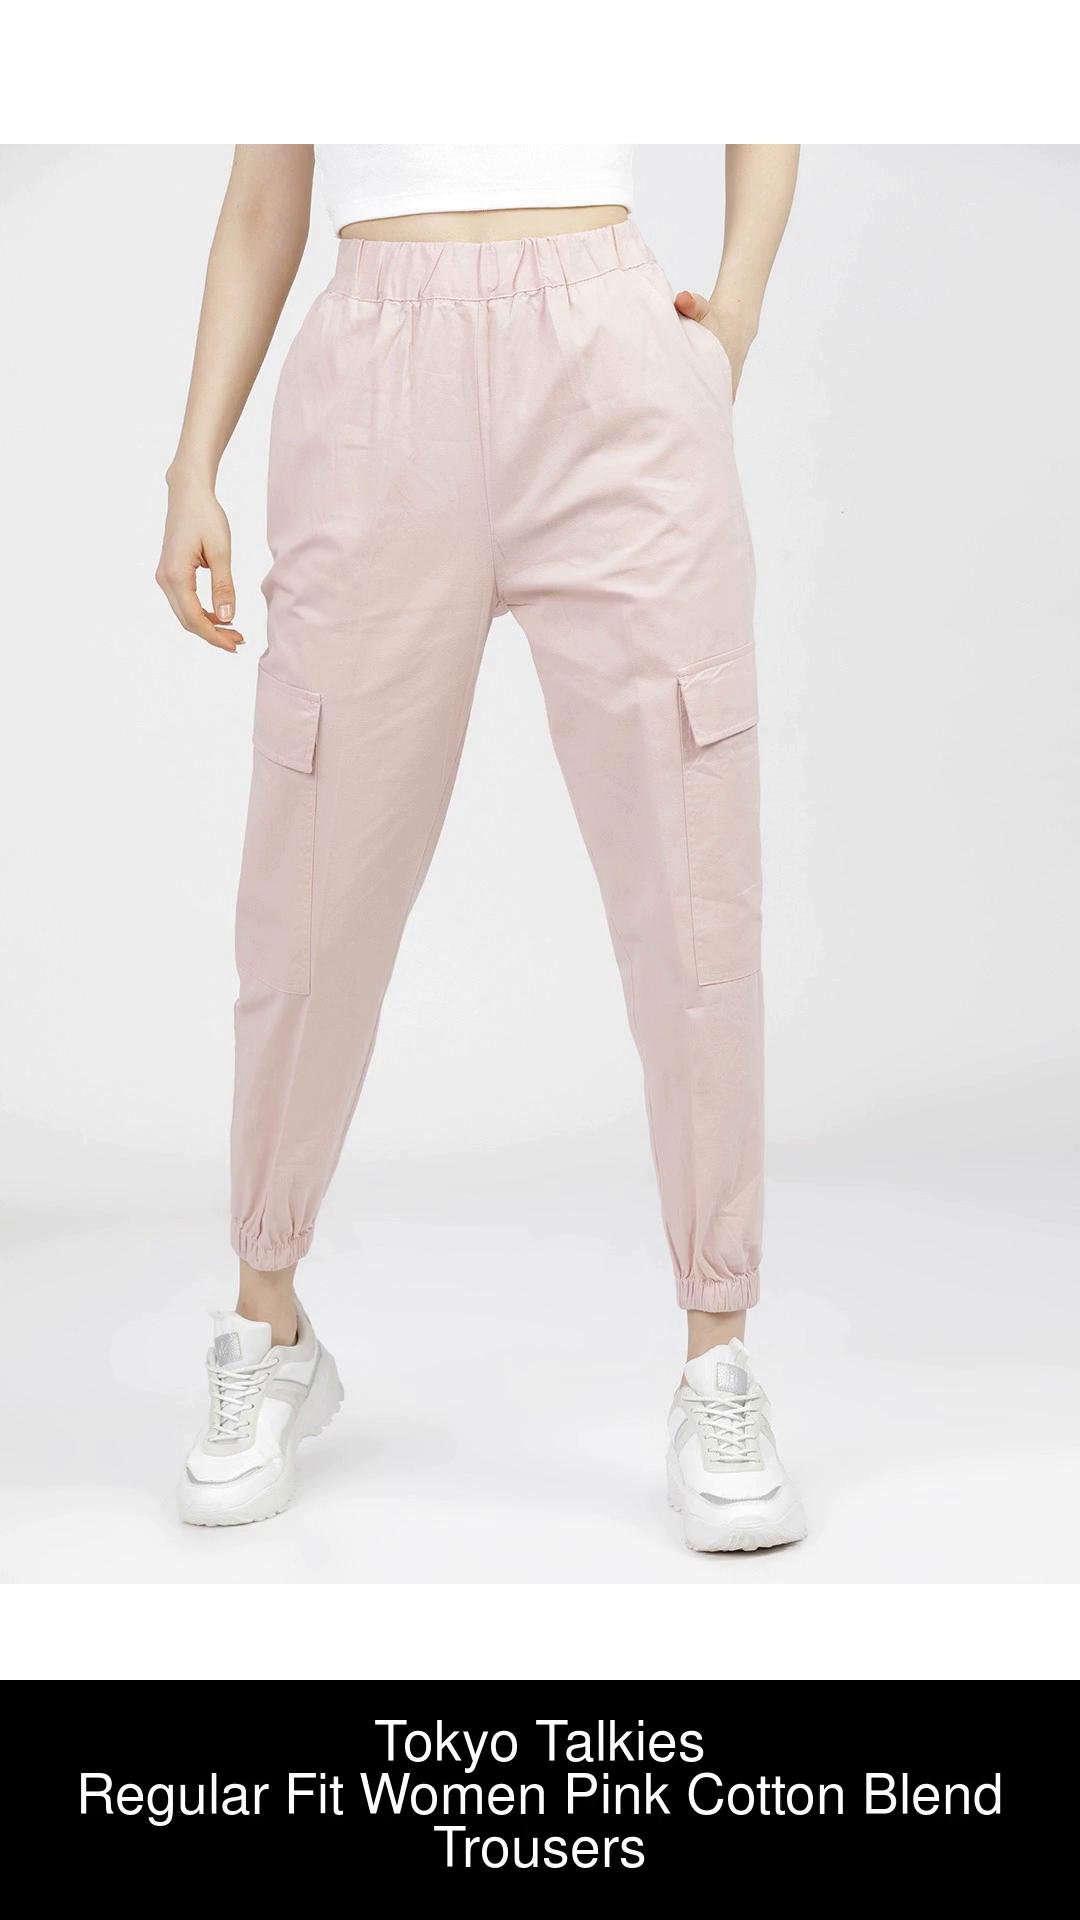 Tokyo Talkies Regular Fit Women Pink Trousers - Buy Tokyo Talkies Regular Fit  Women Pink Trousers Online at Best Prices in India